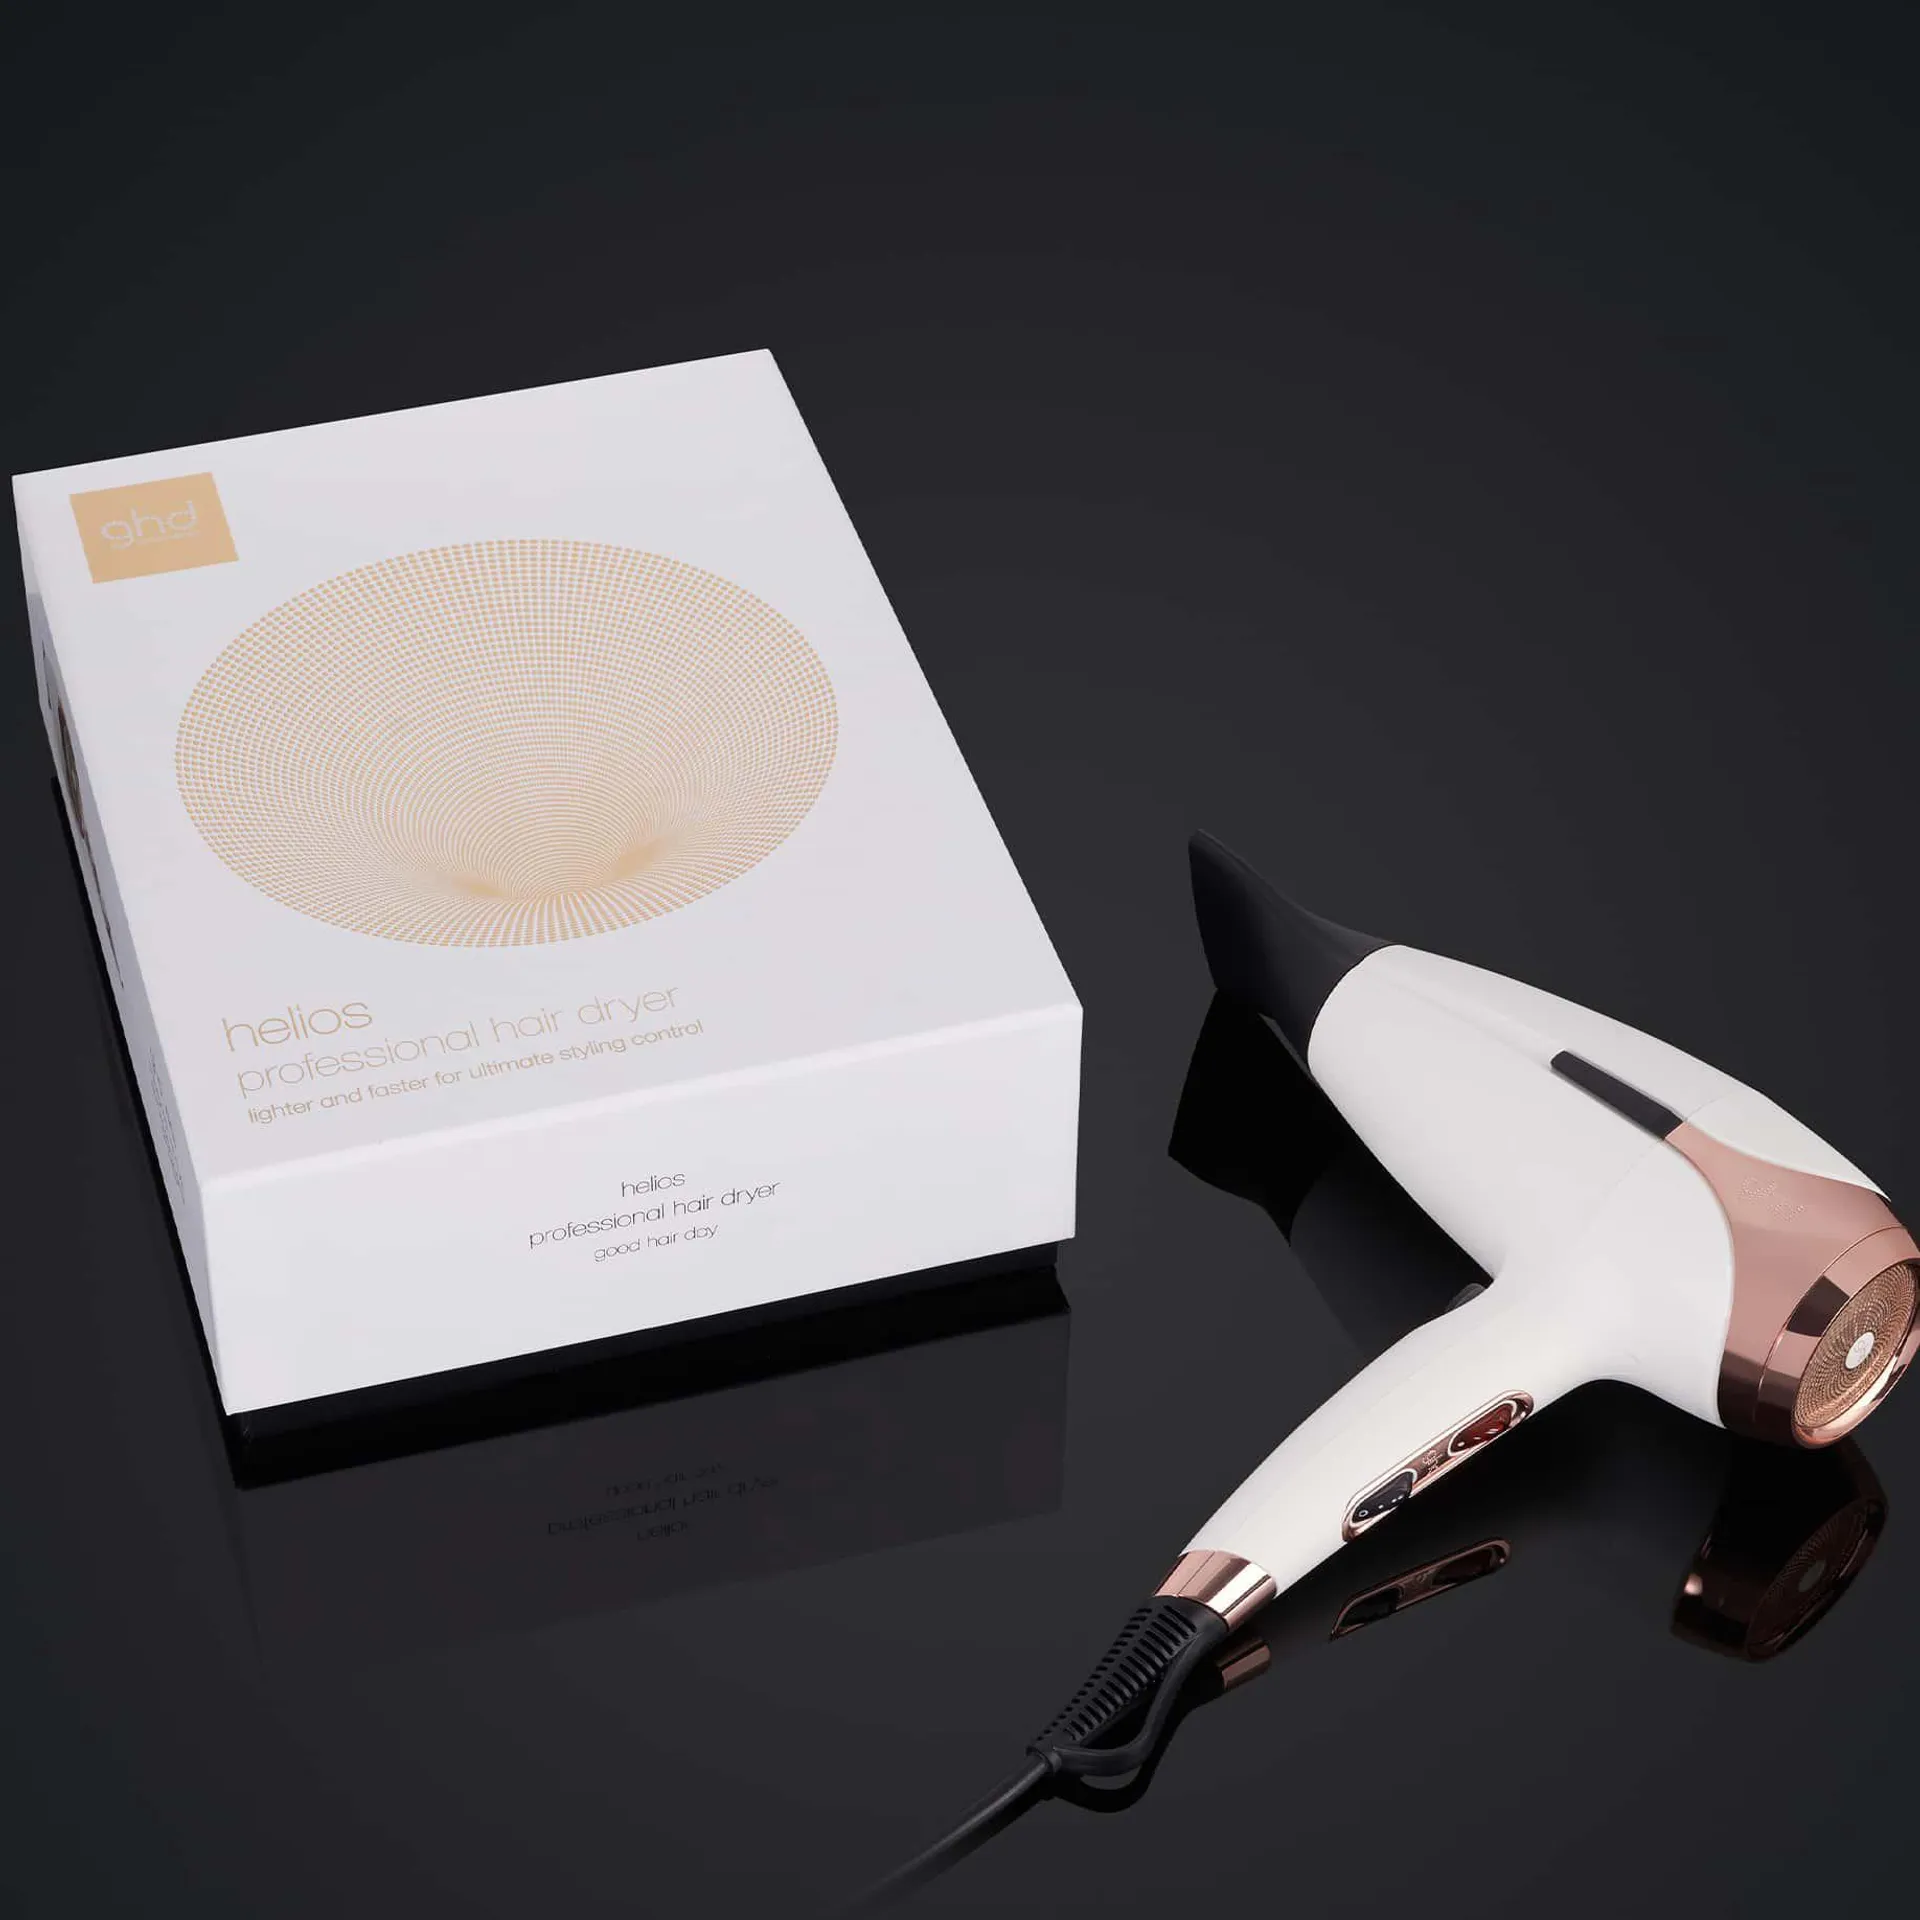 GHD HELIOS® PROFESSIONAL HAIR DRYER IN WHITE